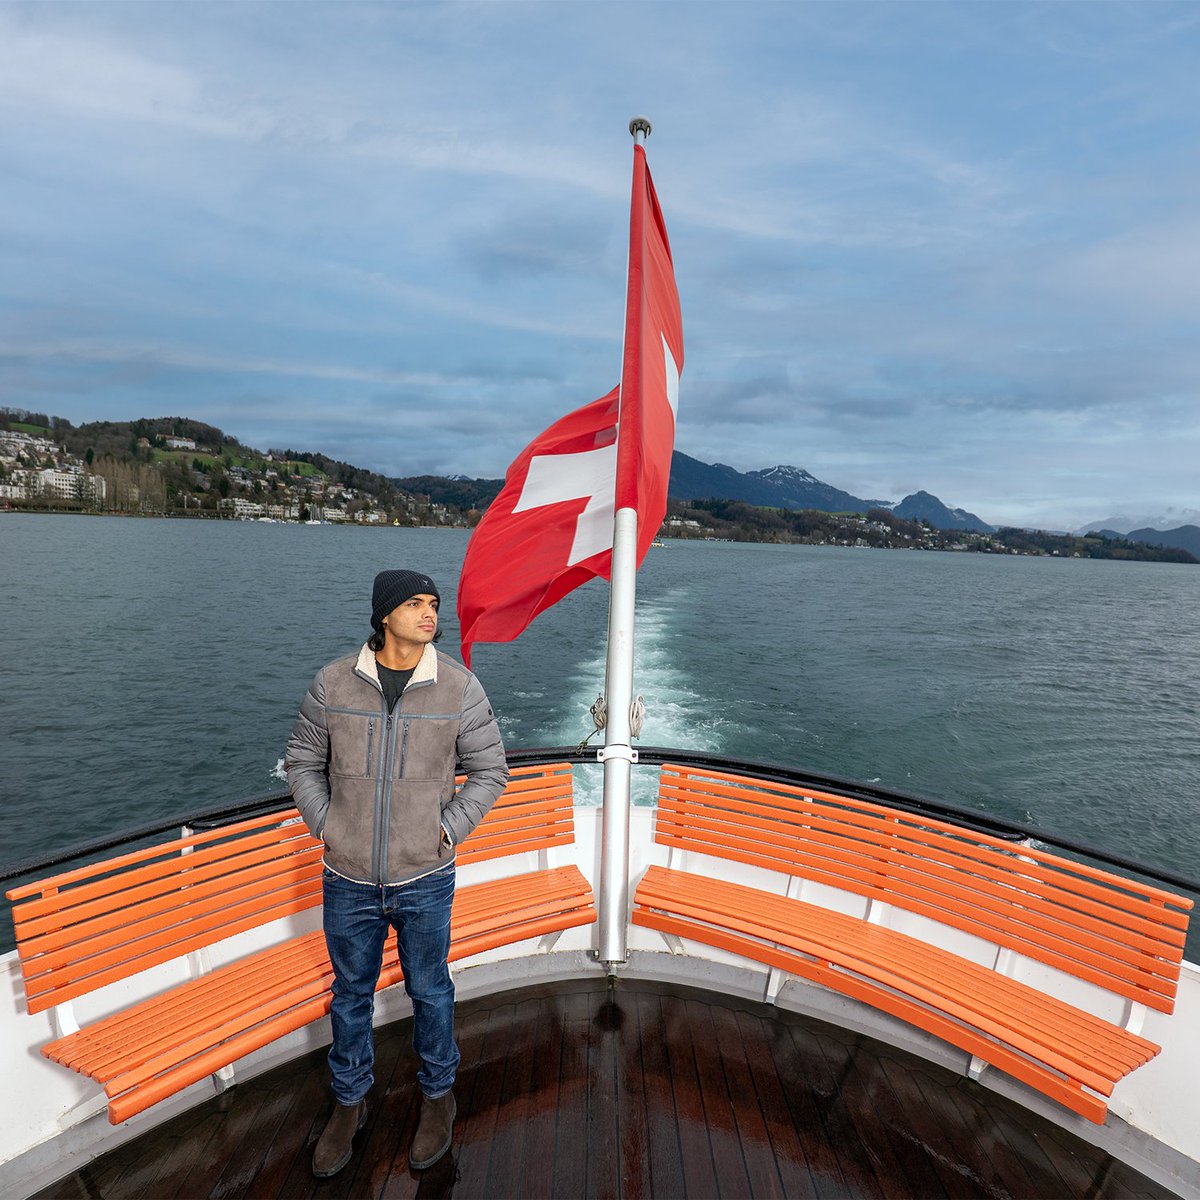 Experience the beauty of Lake Lucerne from the deck of a cruise ship. 📍 @visitlucerne @Neeraj_chopra1 #INeedSwitzerland #BoatRides #Adventure